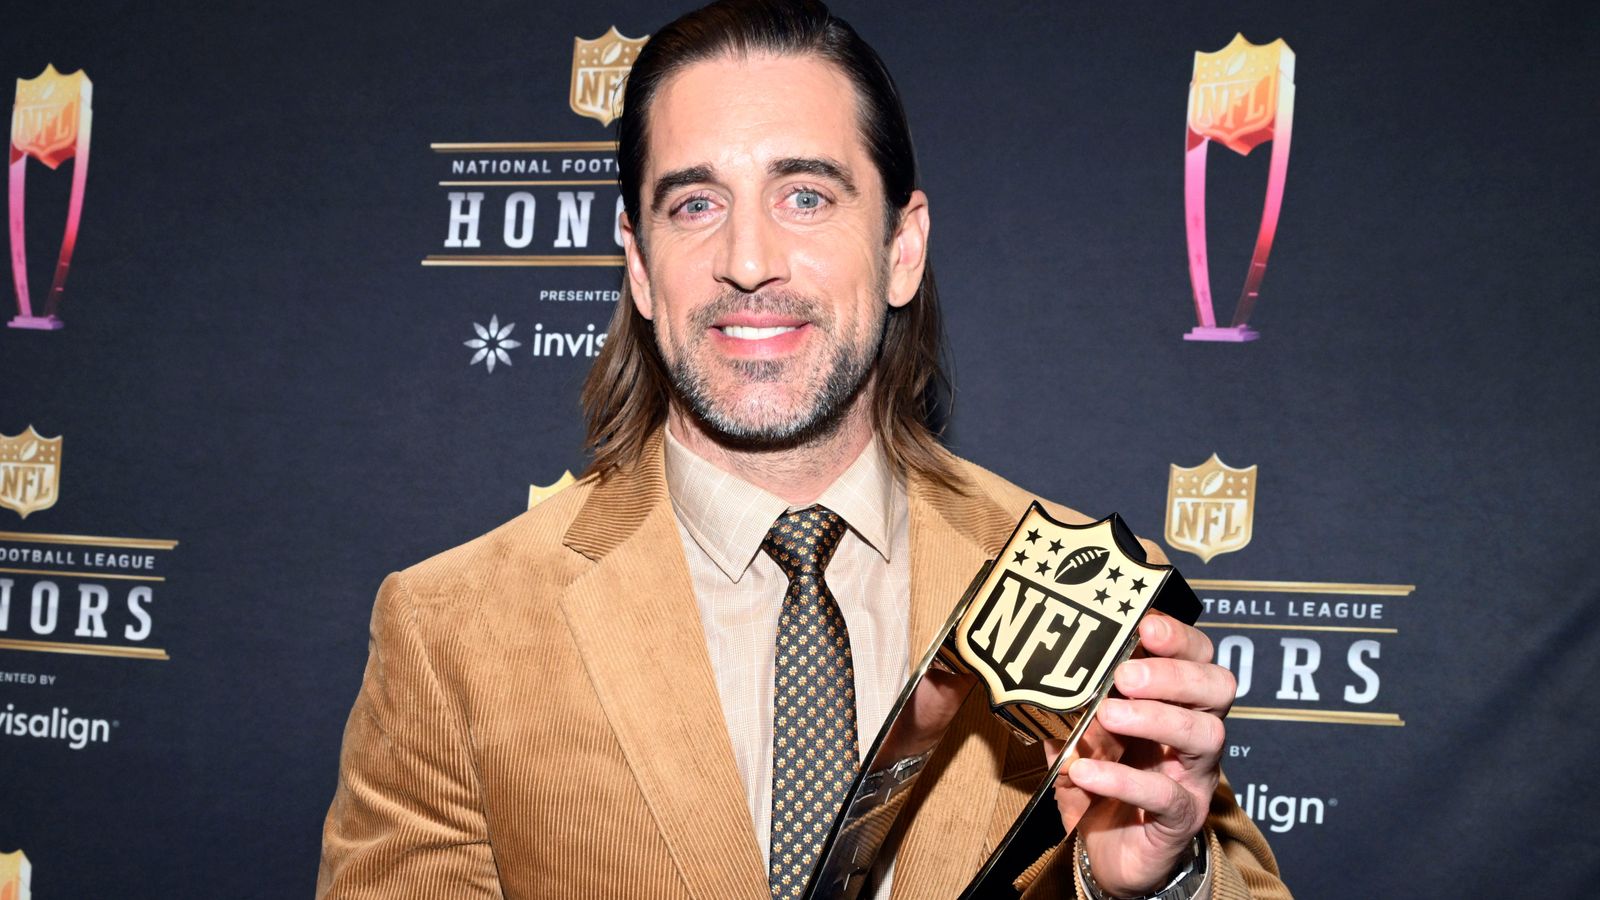 Aaron Rodgers named 2021 NFL MVP as Green Bay Packers quarterback